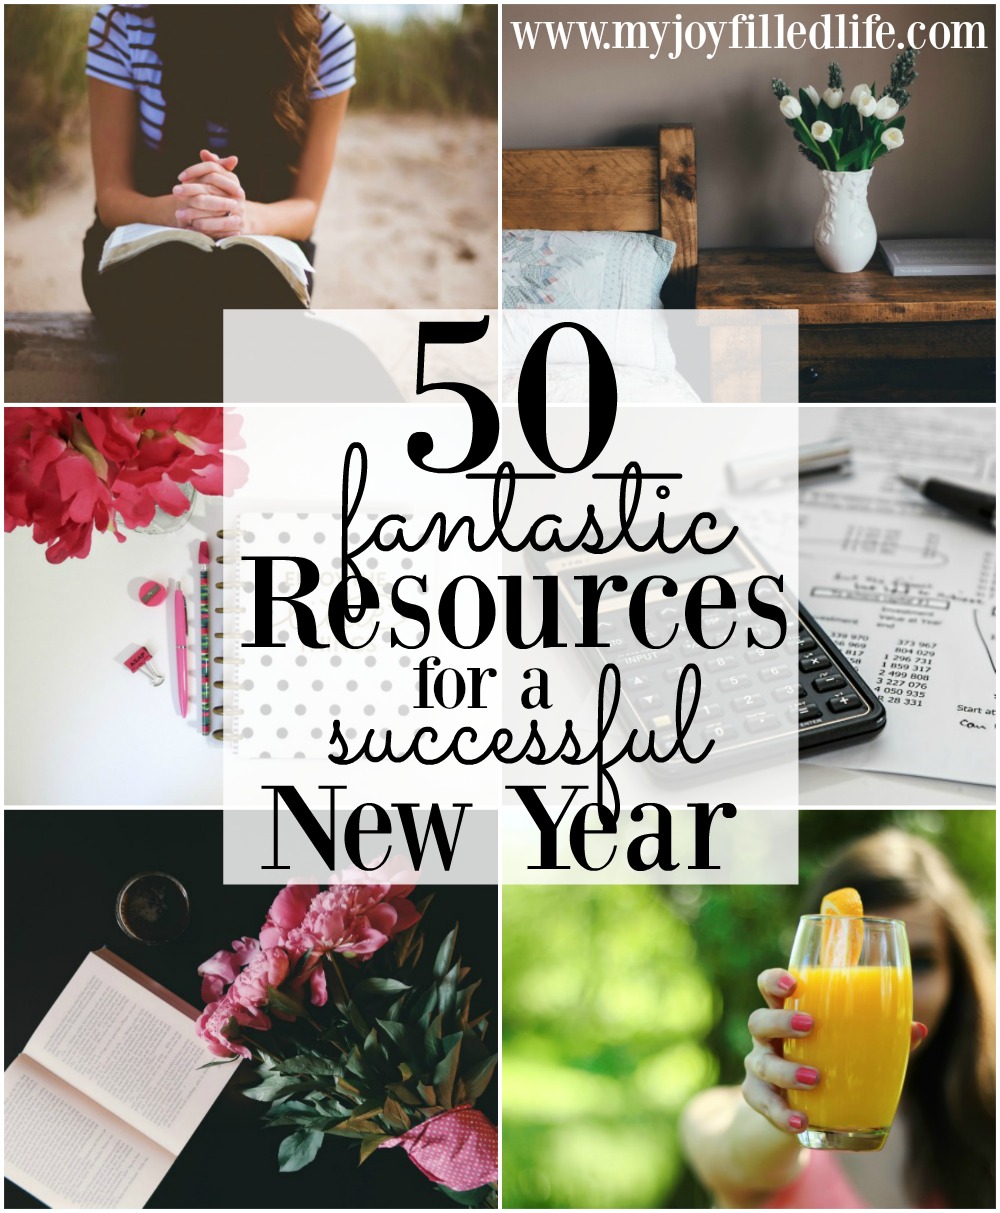 50 Fantastic Resources for a Successful New Year